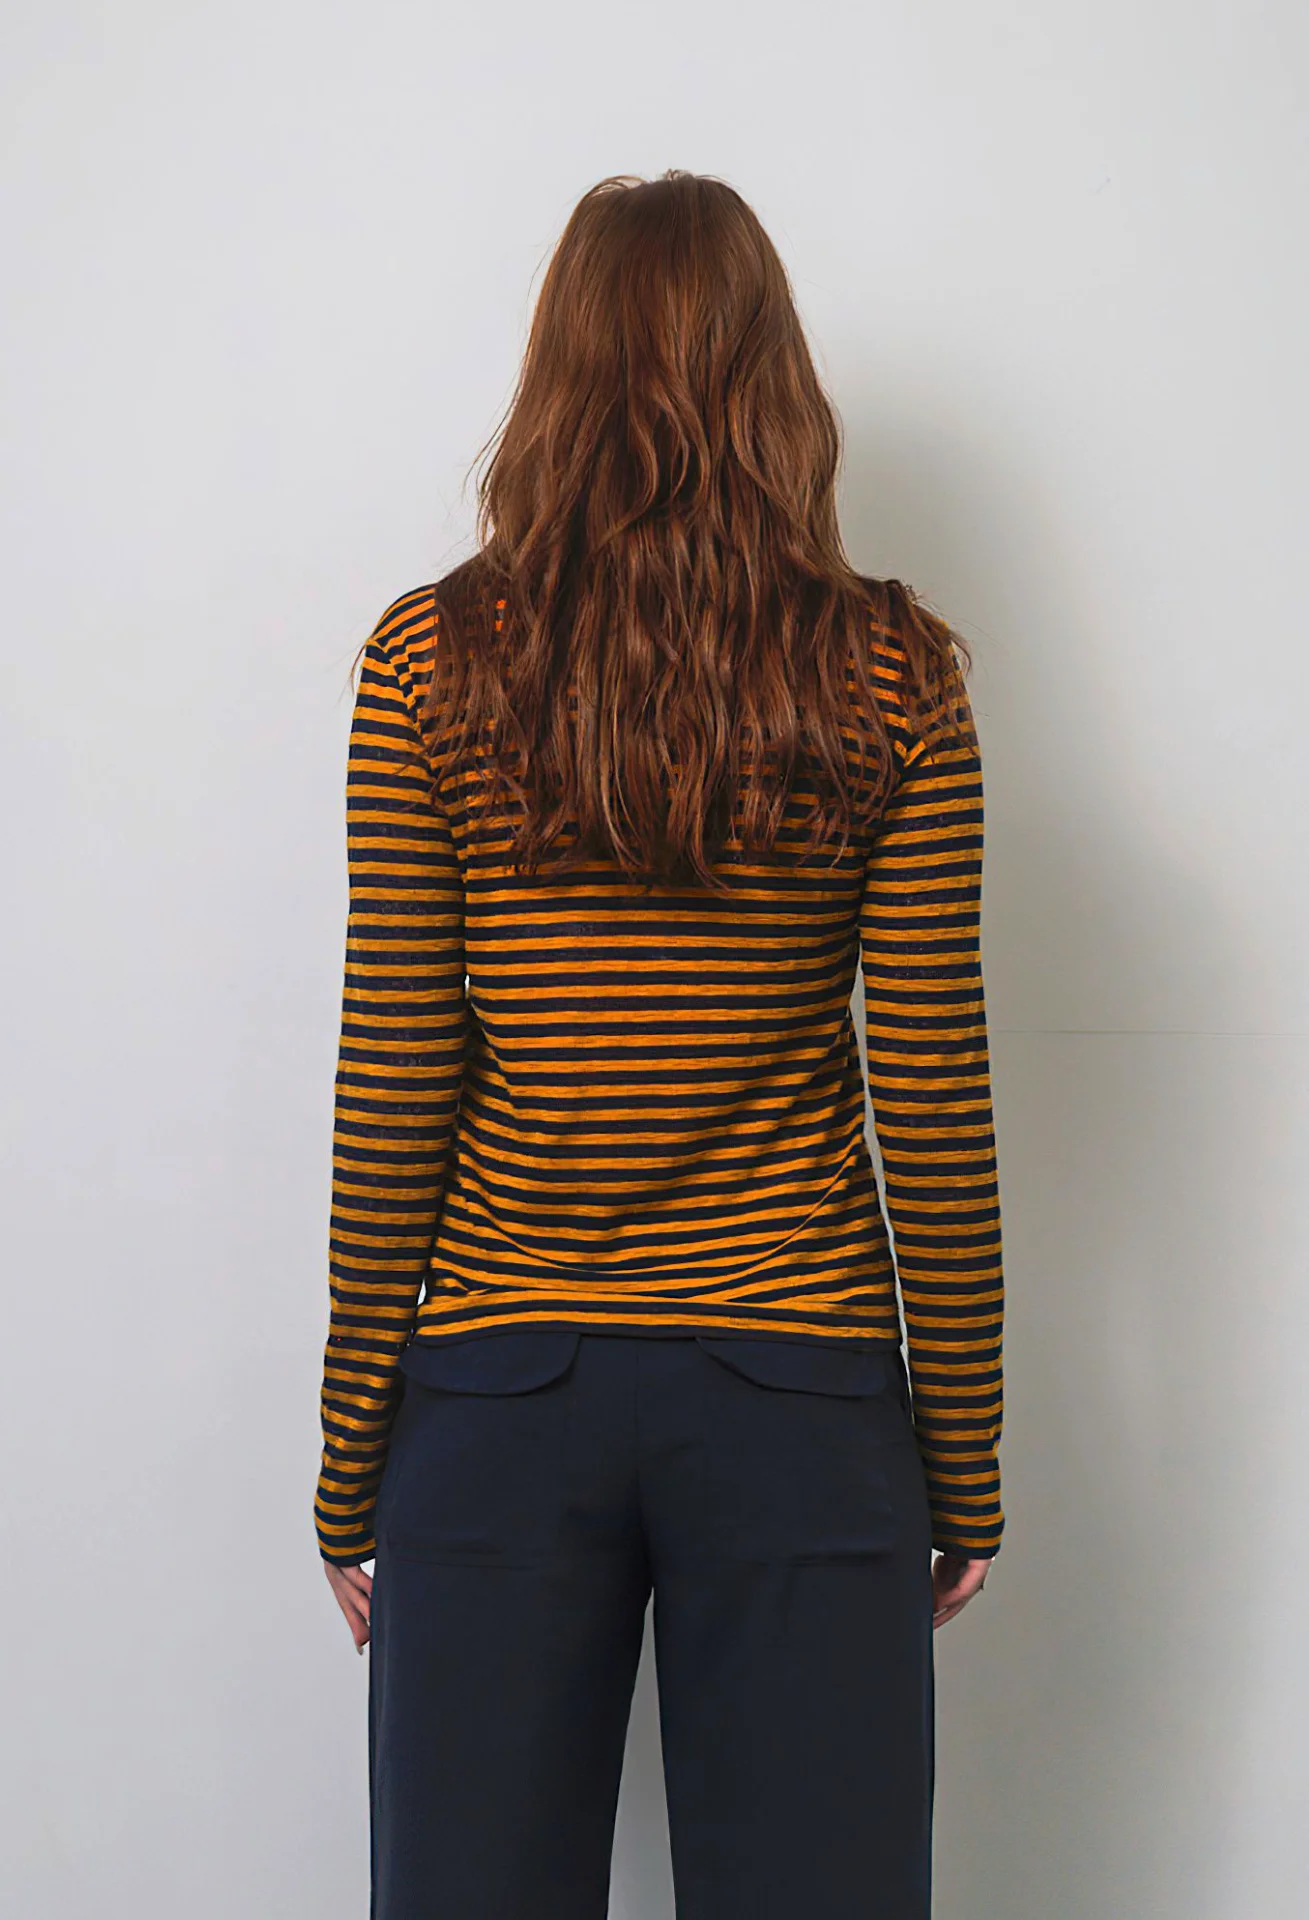 & other stories - Striped Longsleeve Tee (34)